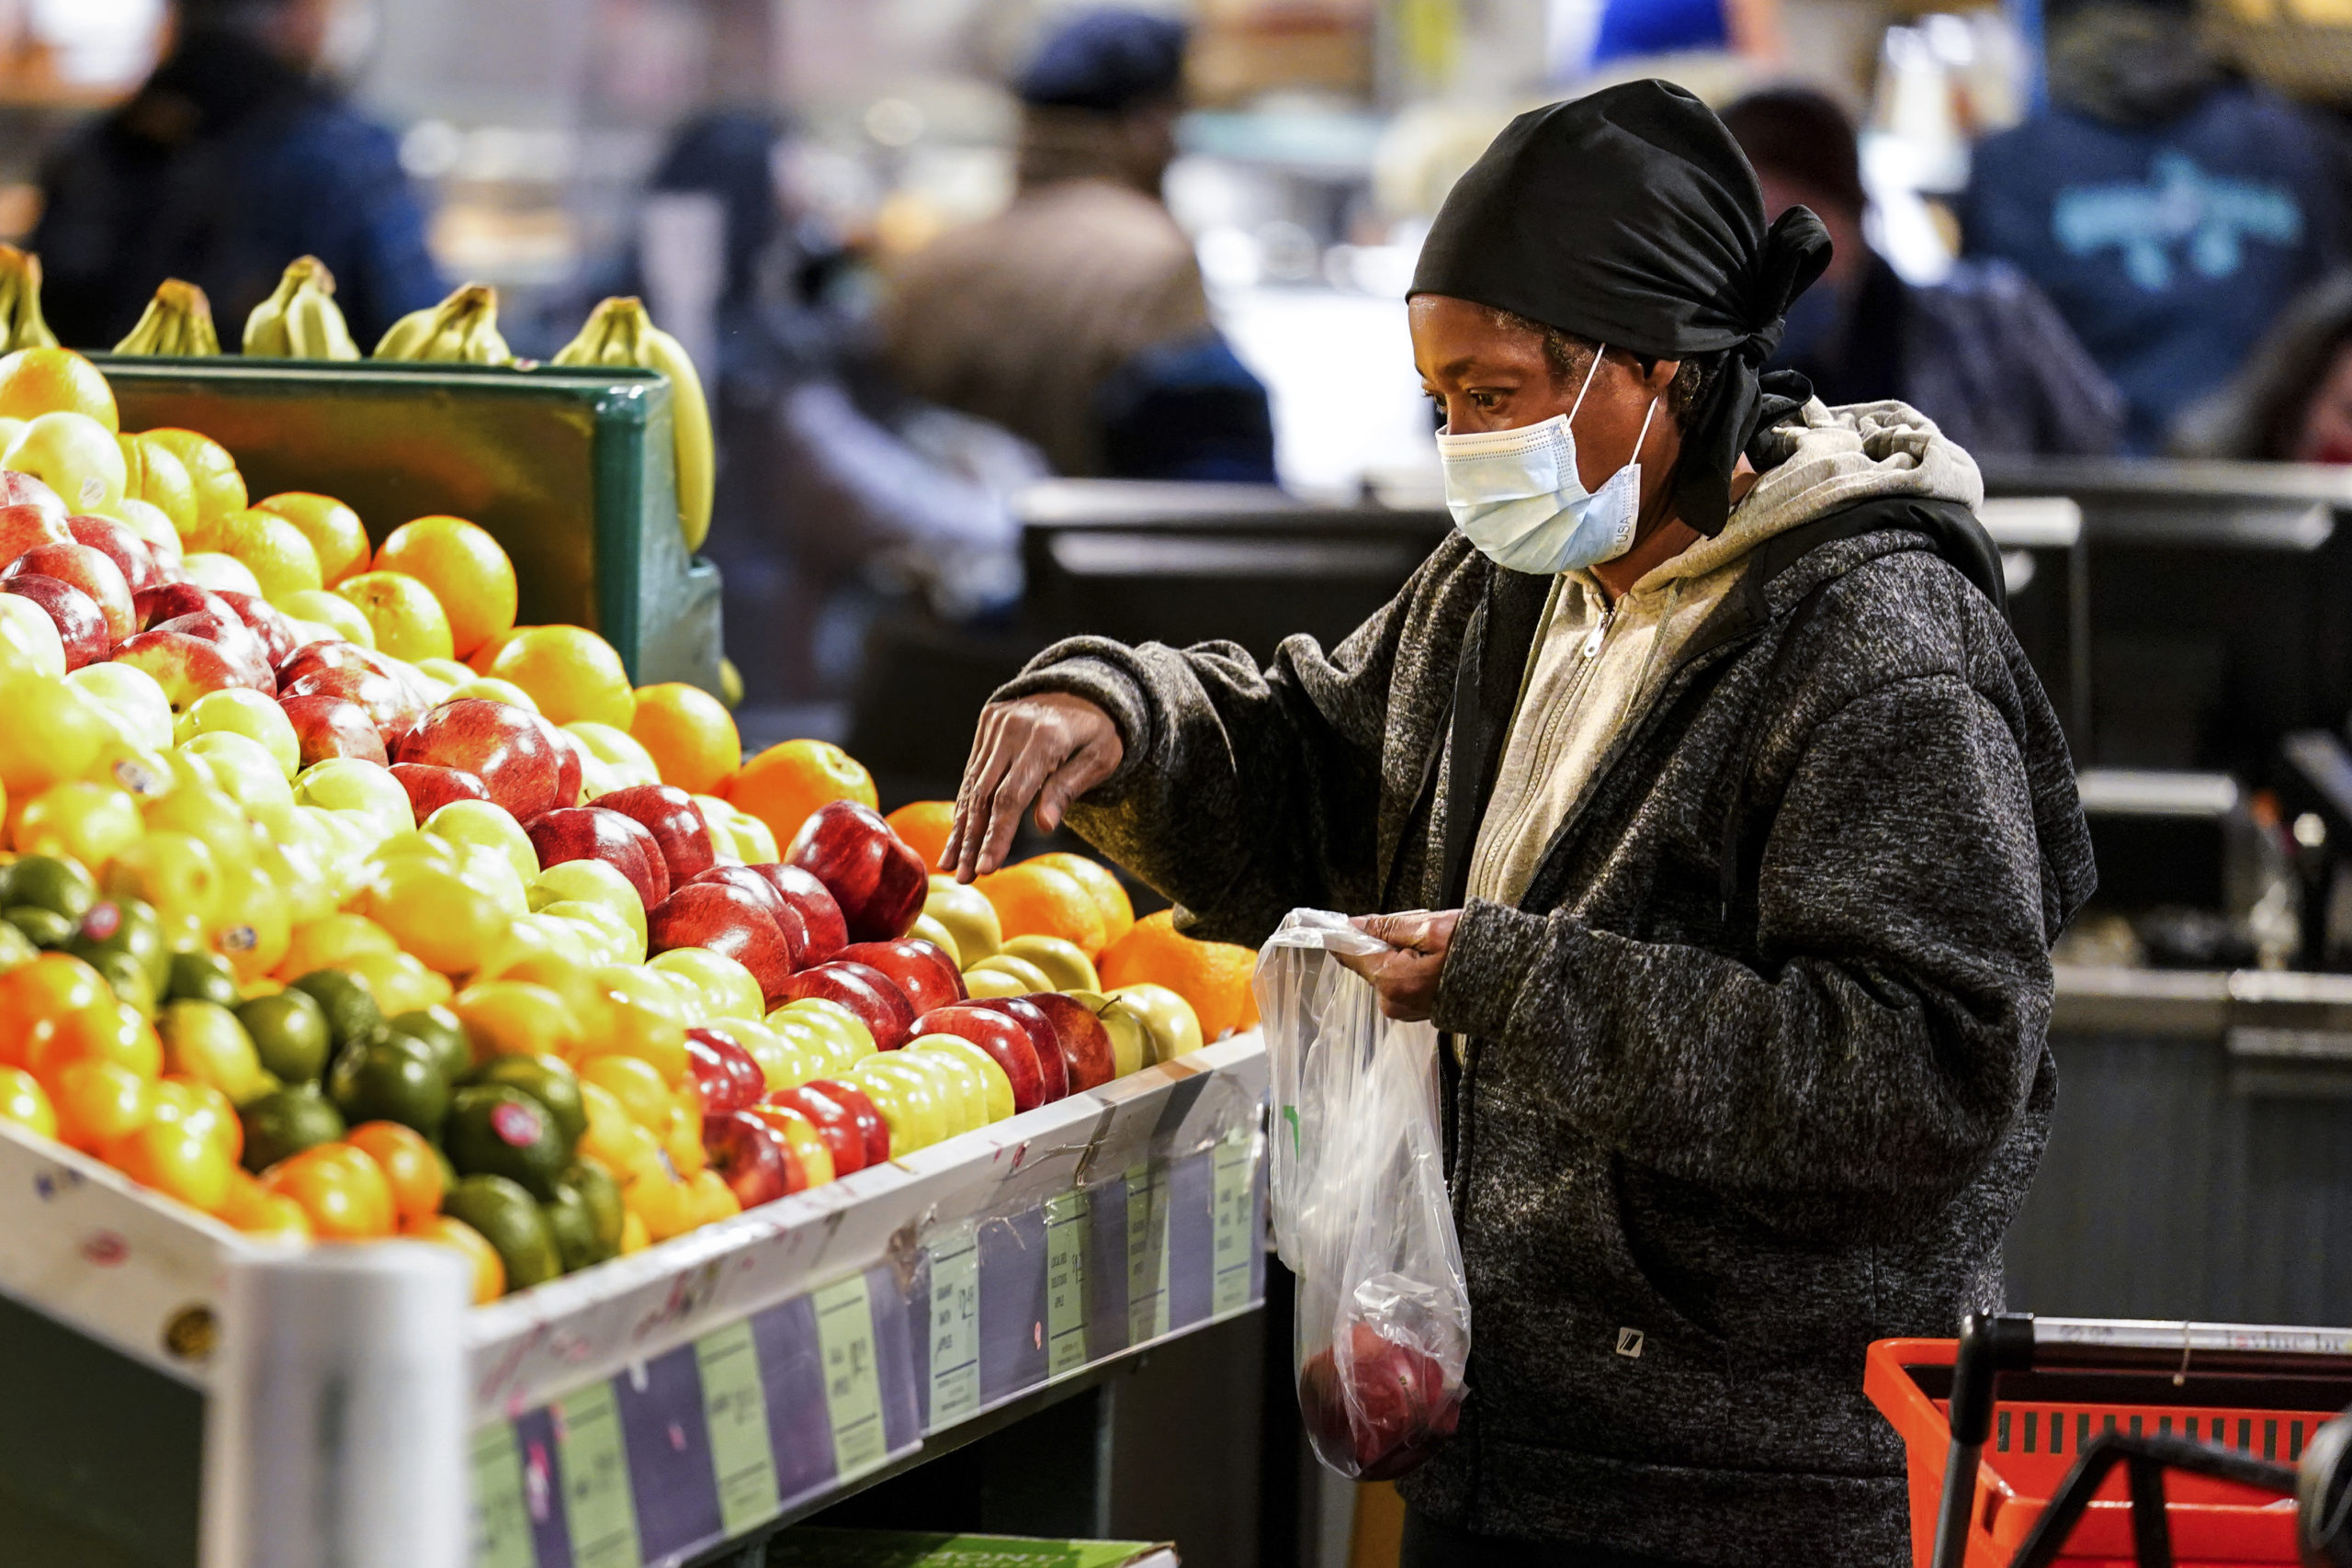 A shopper waring a proactive mask as a precaution against the spread of the coronavirus selects fru...